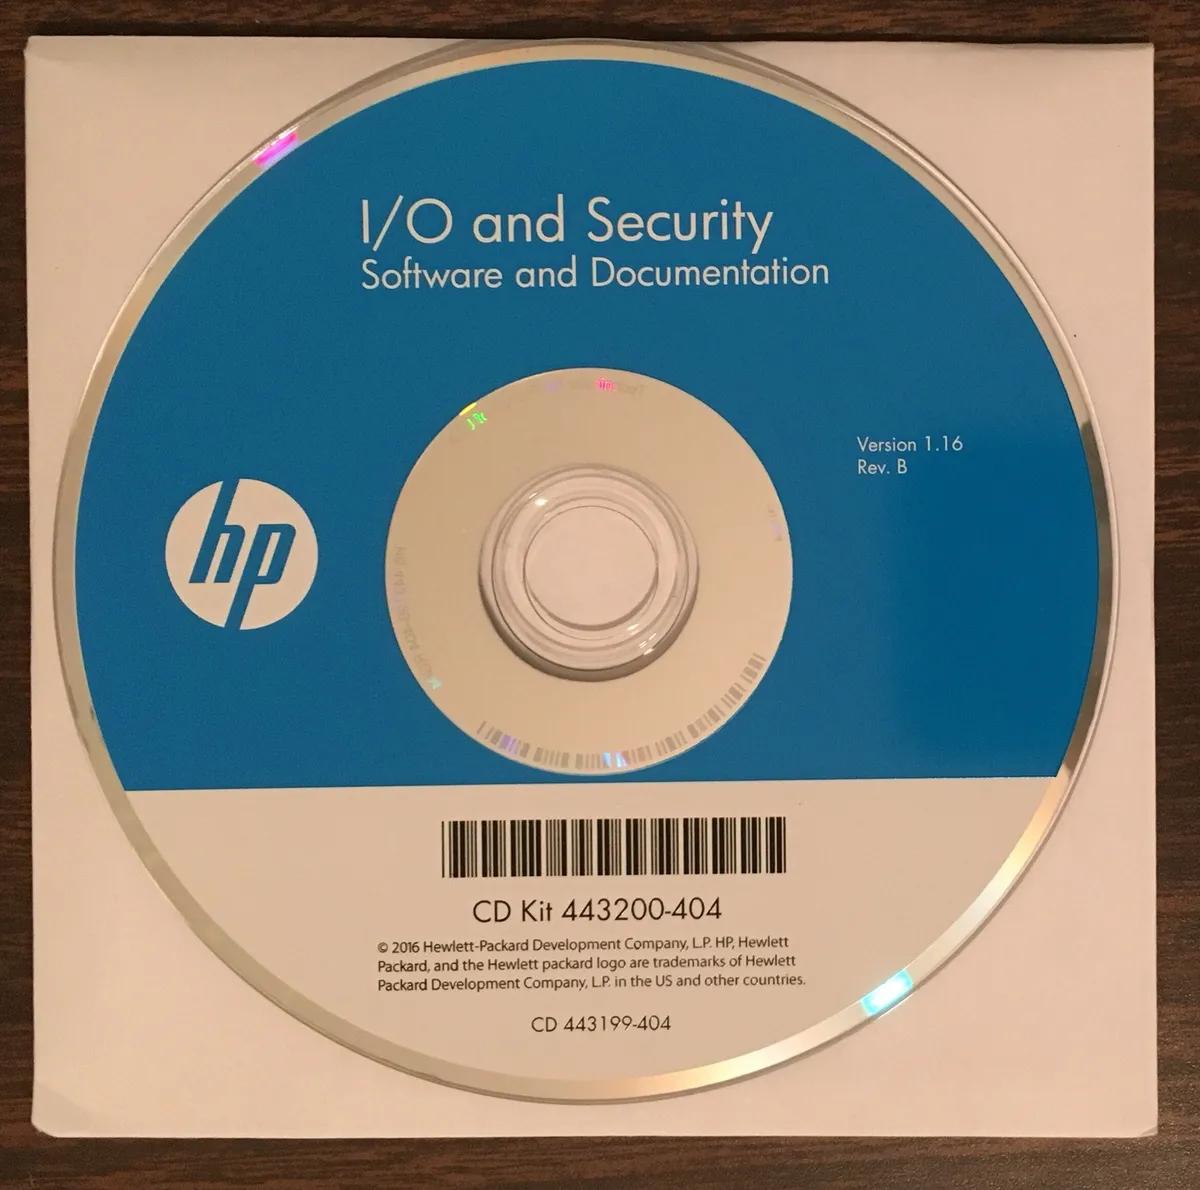 hewlett packard security software - What is HP security Manager software